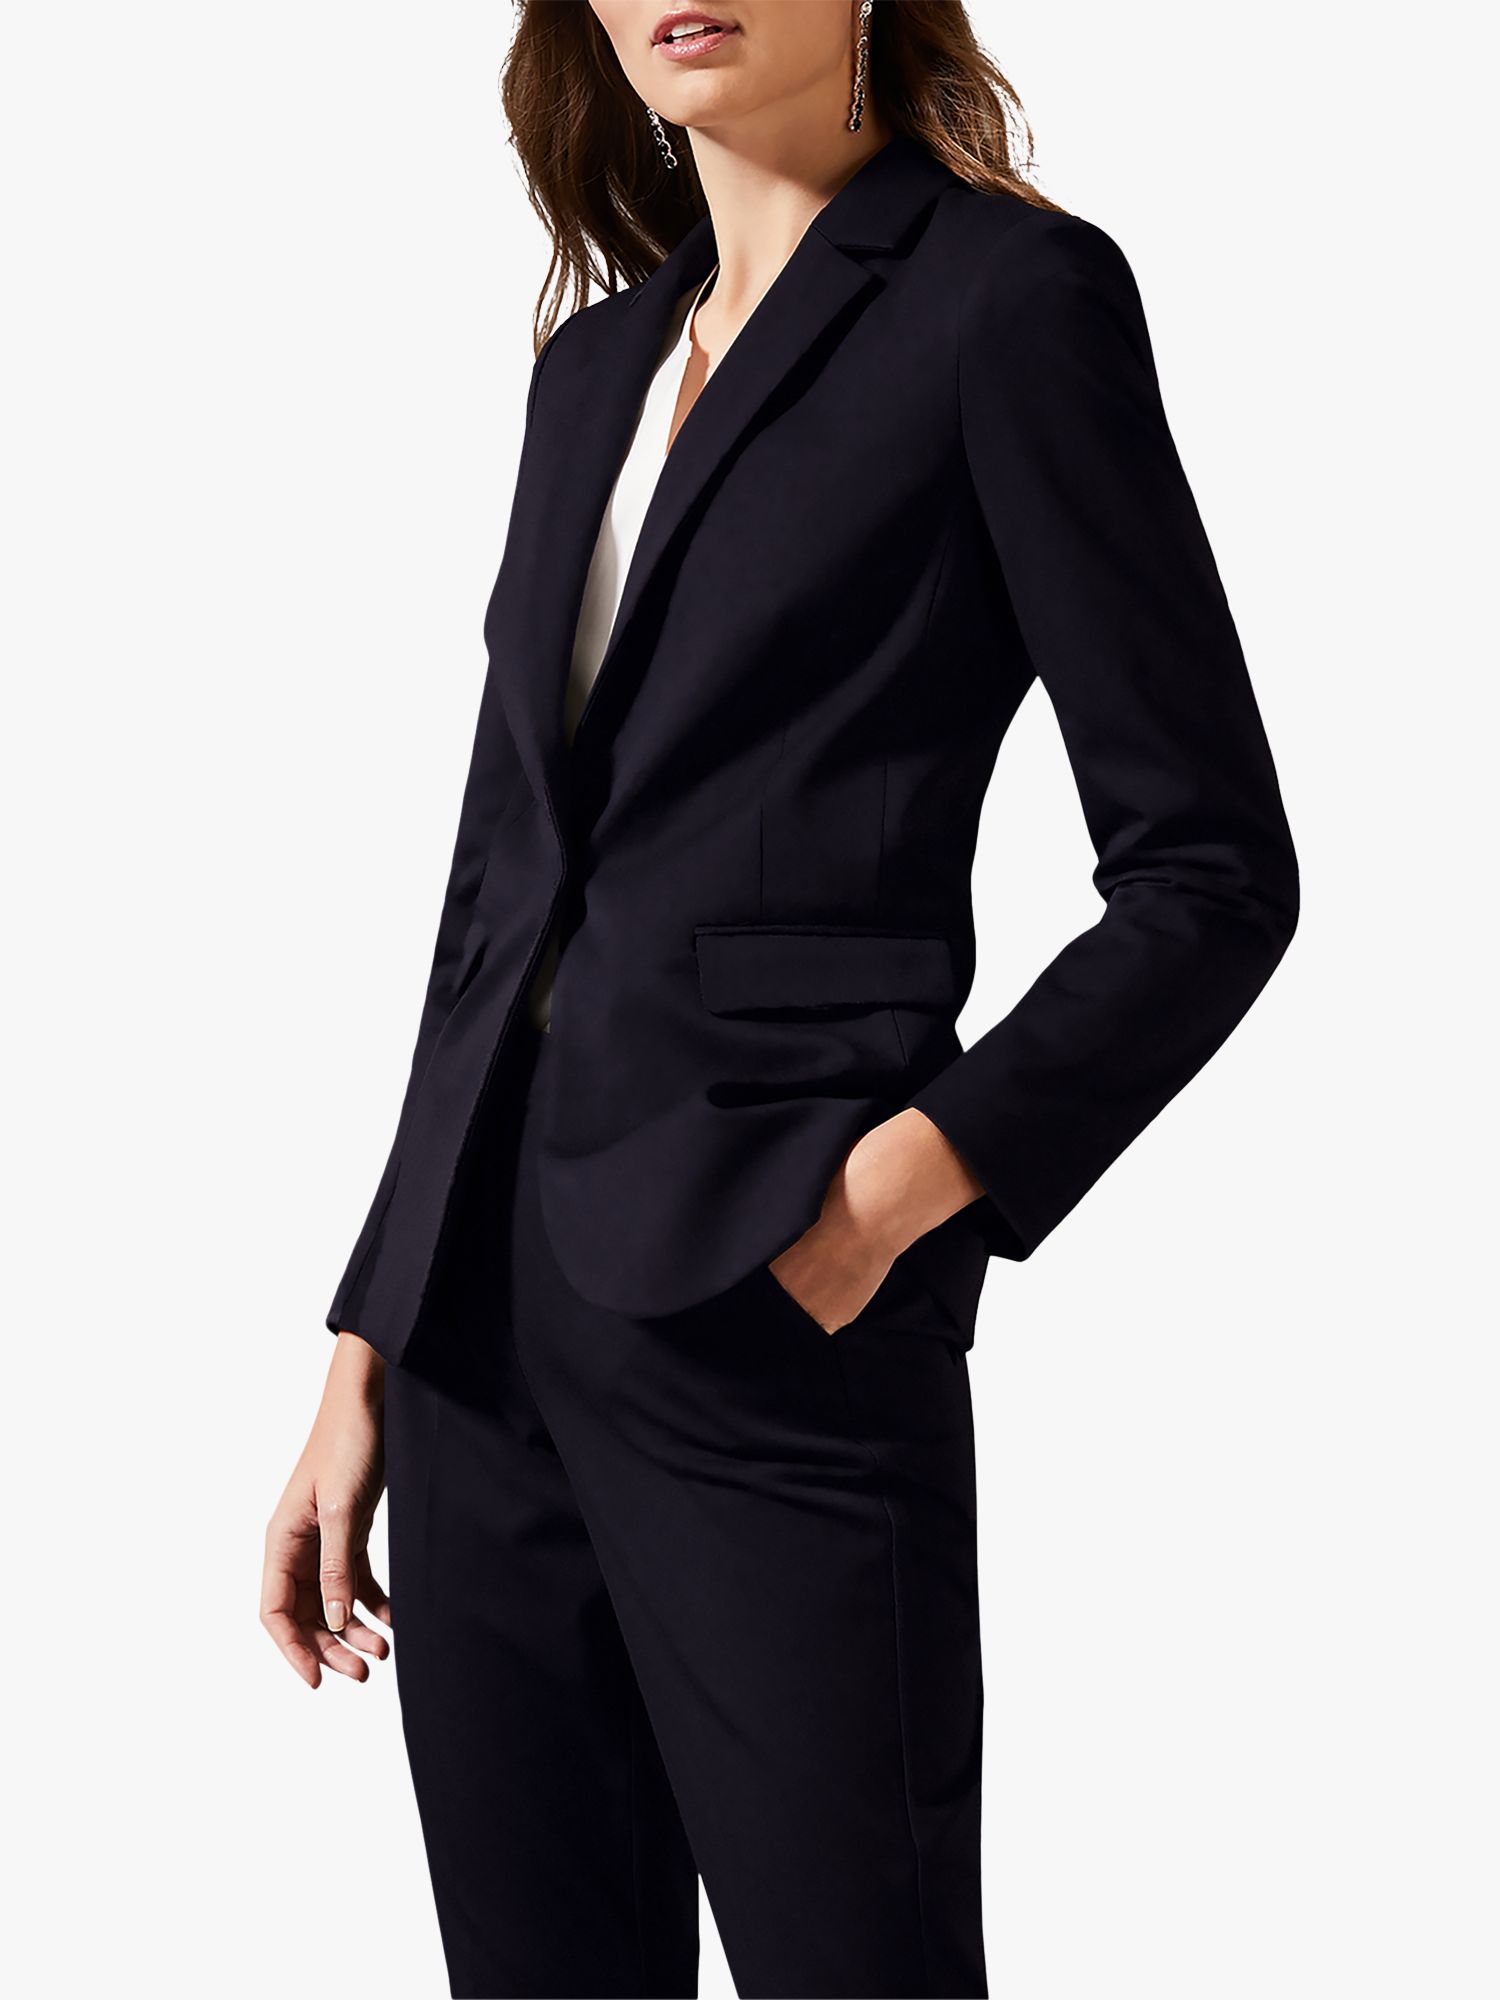 Phase Eight Ulrica Suit Jacket, Navy